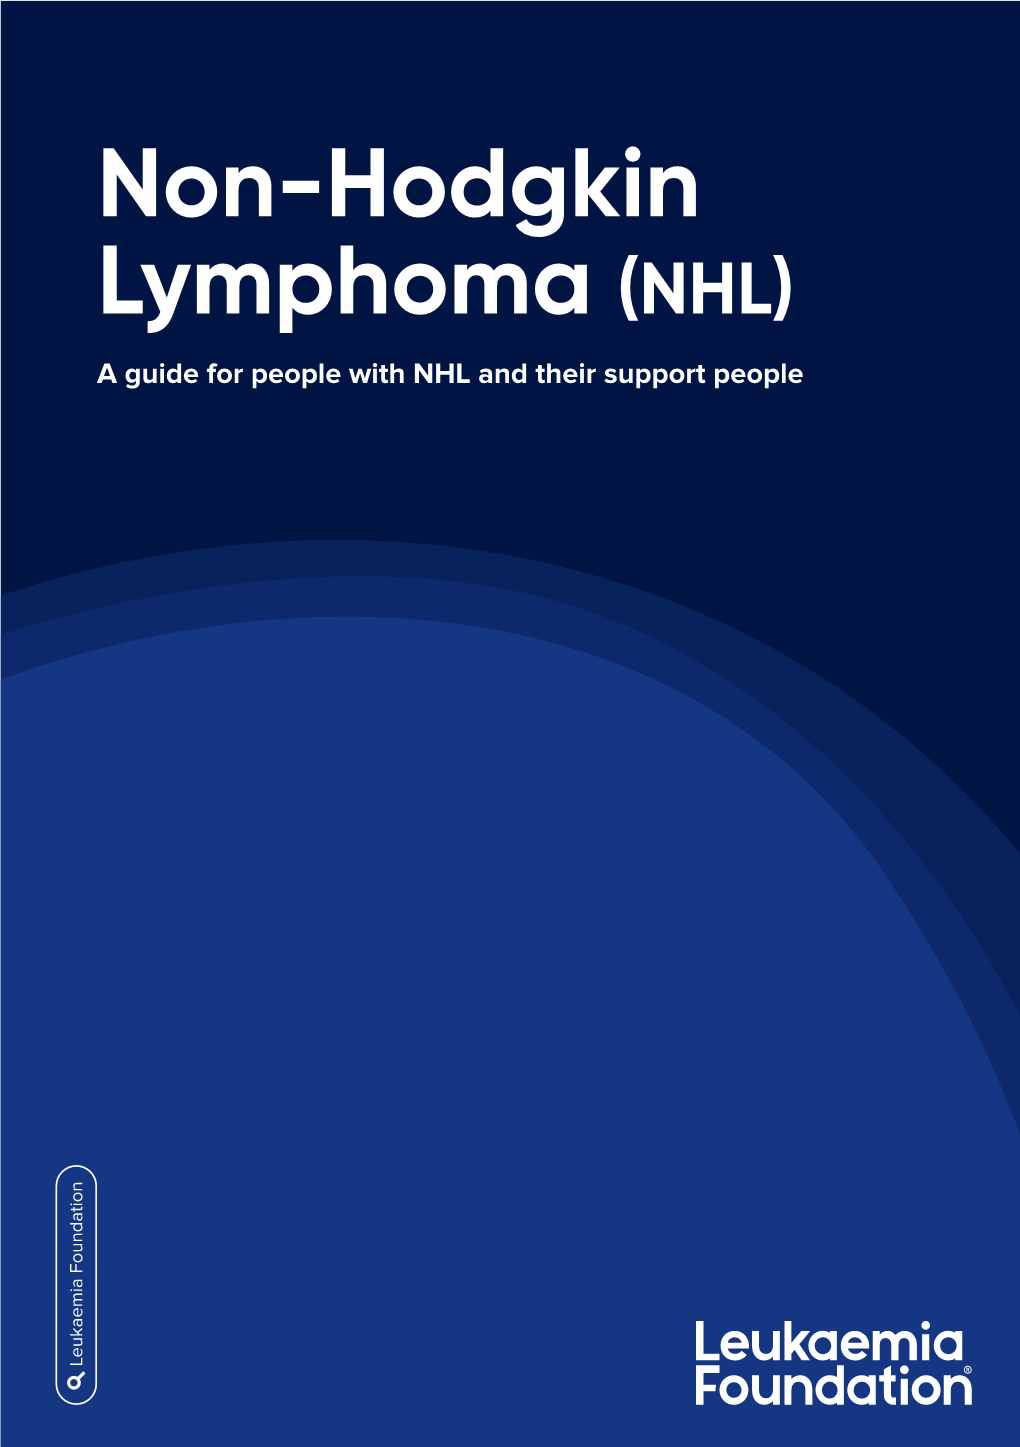 Non-Hodgkin Lymphoma (NHL) a Guide for People with NHL and Their Support People